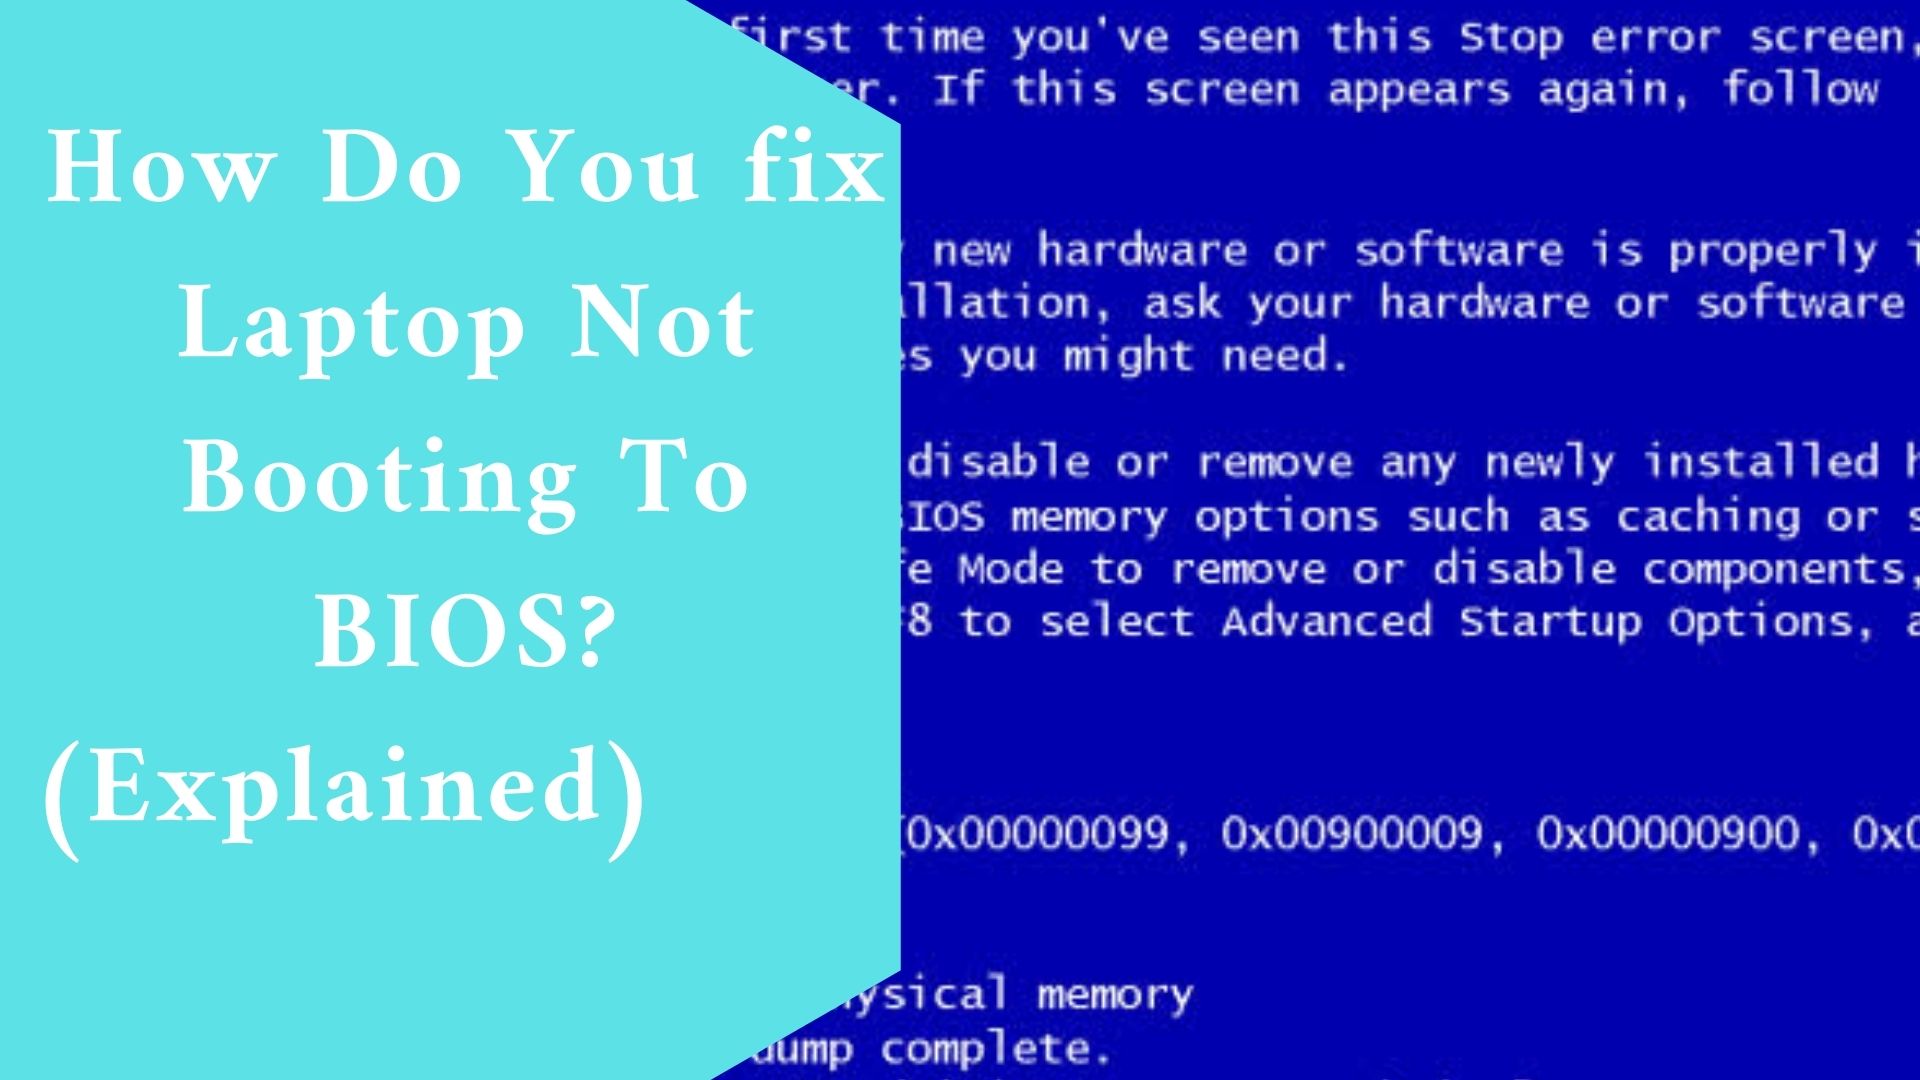 How Do You fix Laptop Not Booting To BIOS? (Explained)